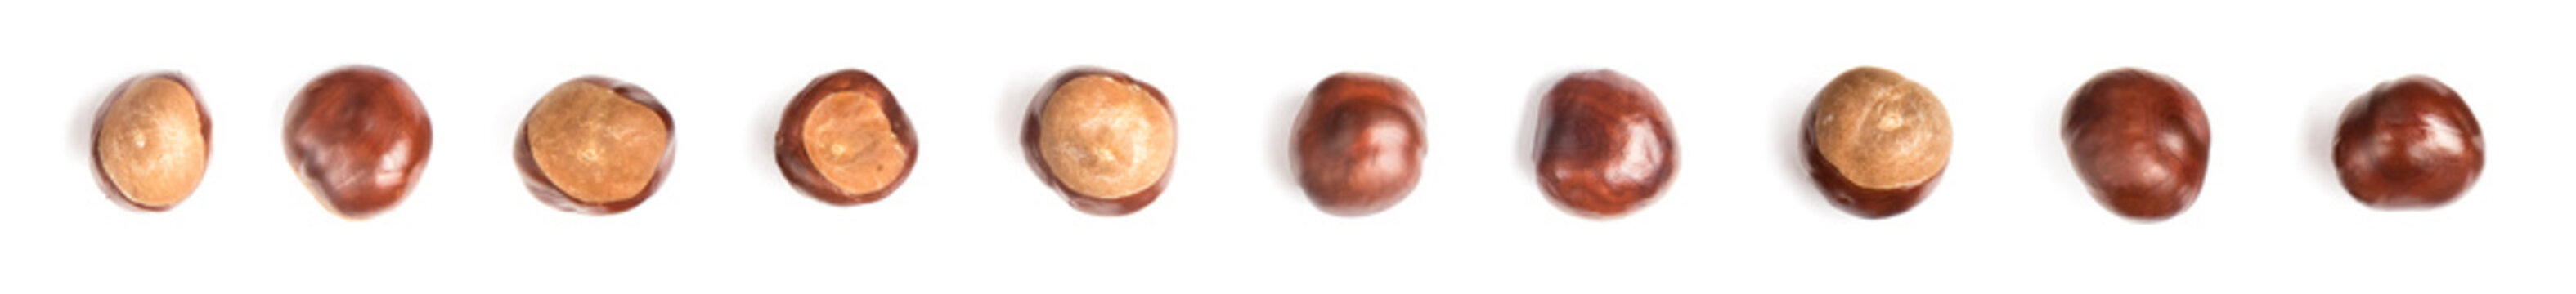 row of chestnuts or aesculus hippocastanum or conker tree nuts isolated on white background